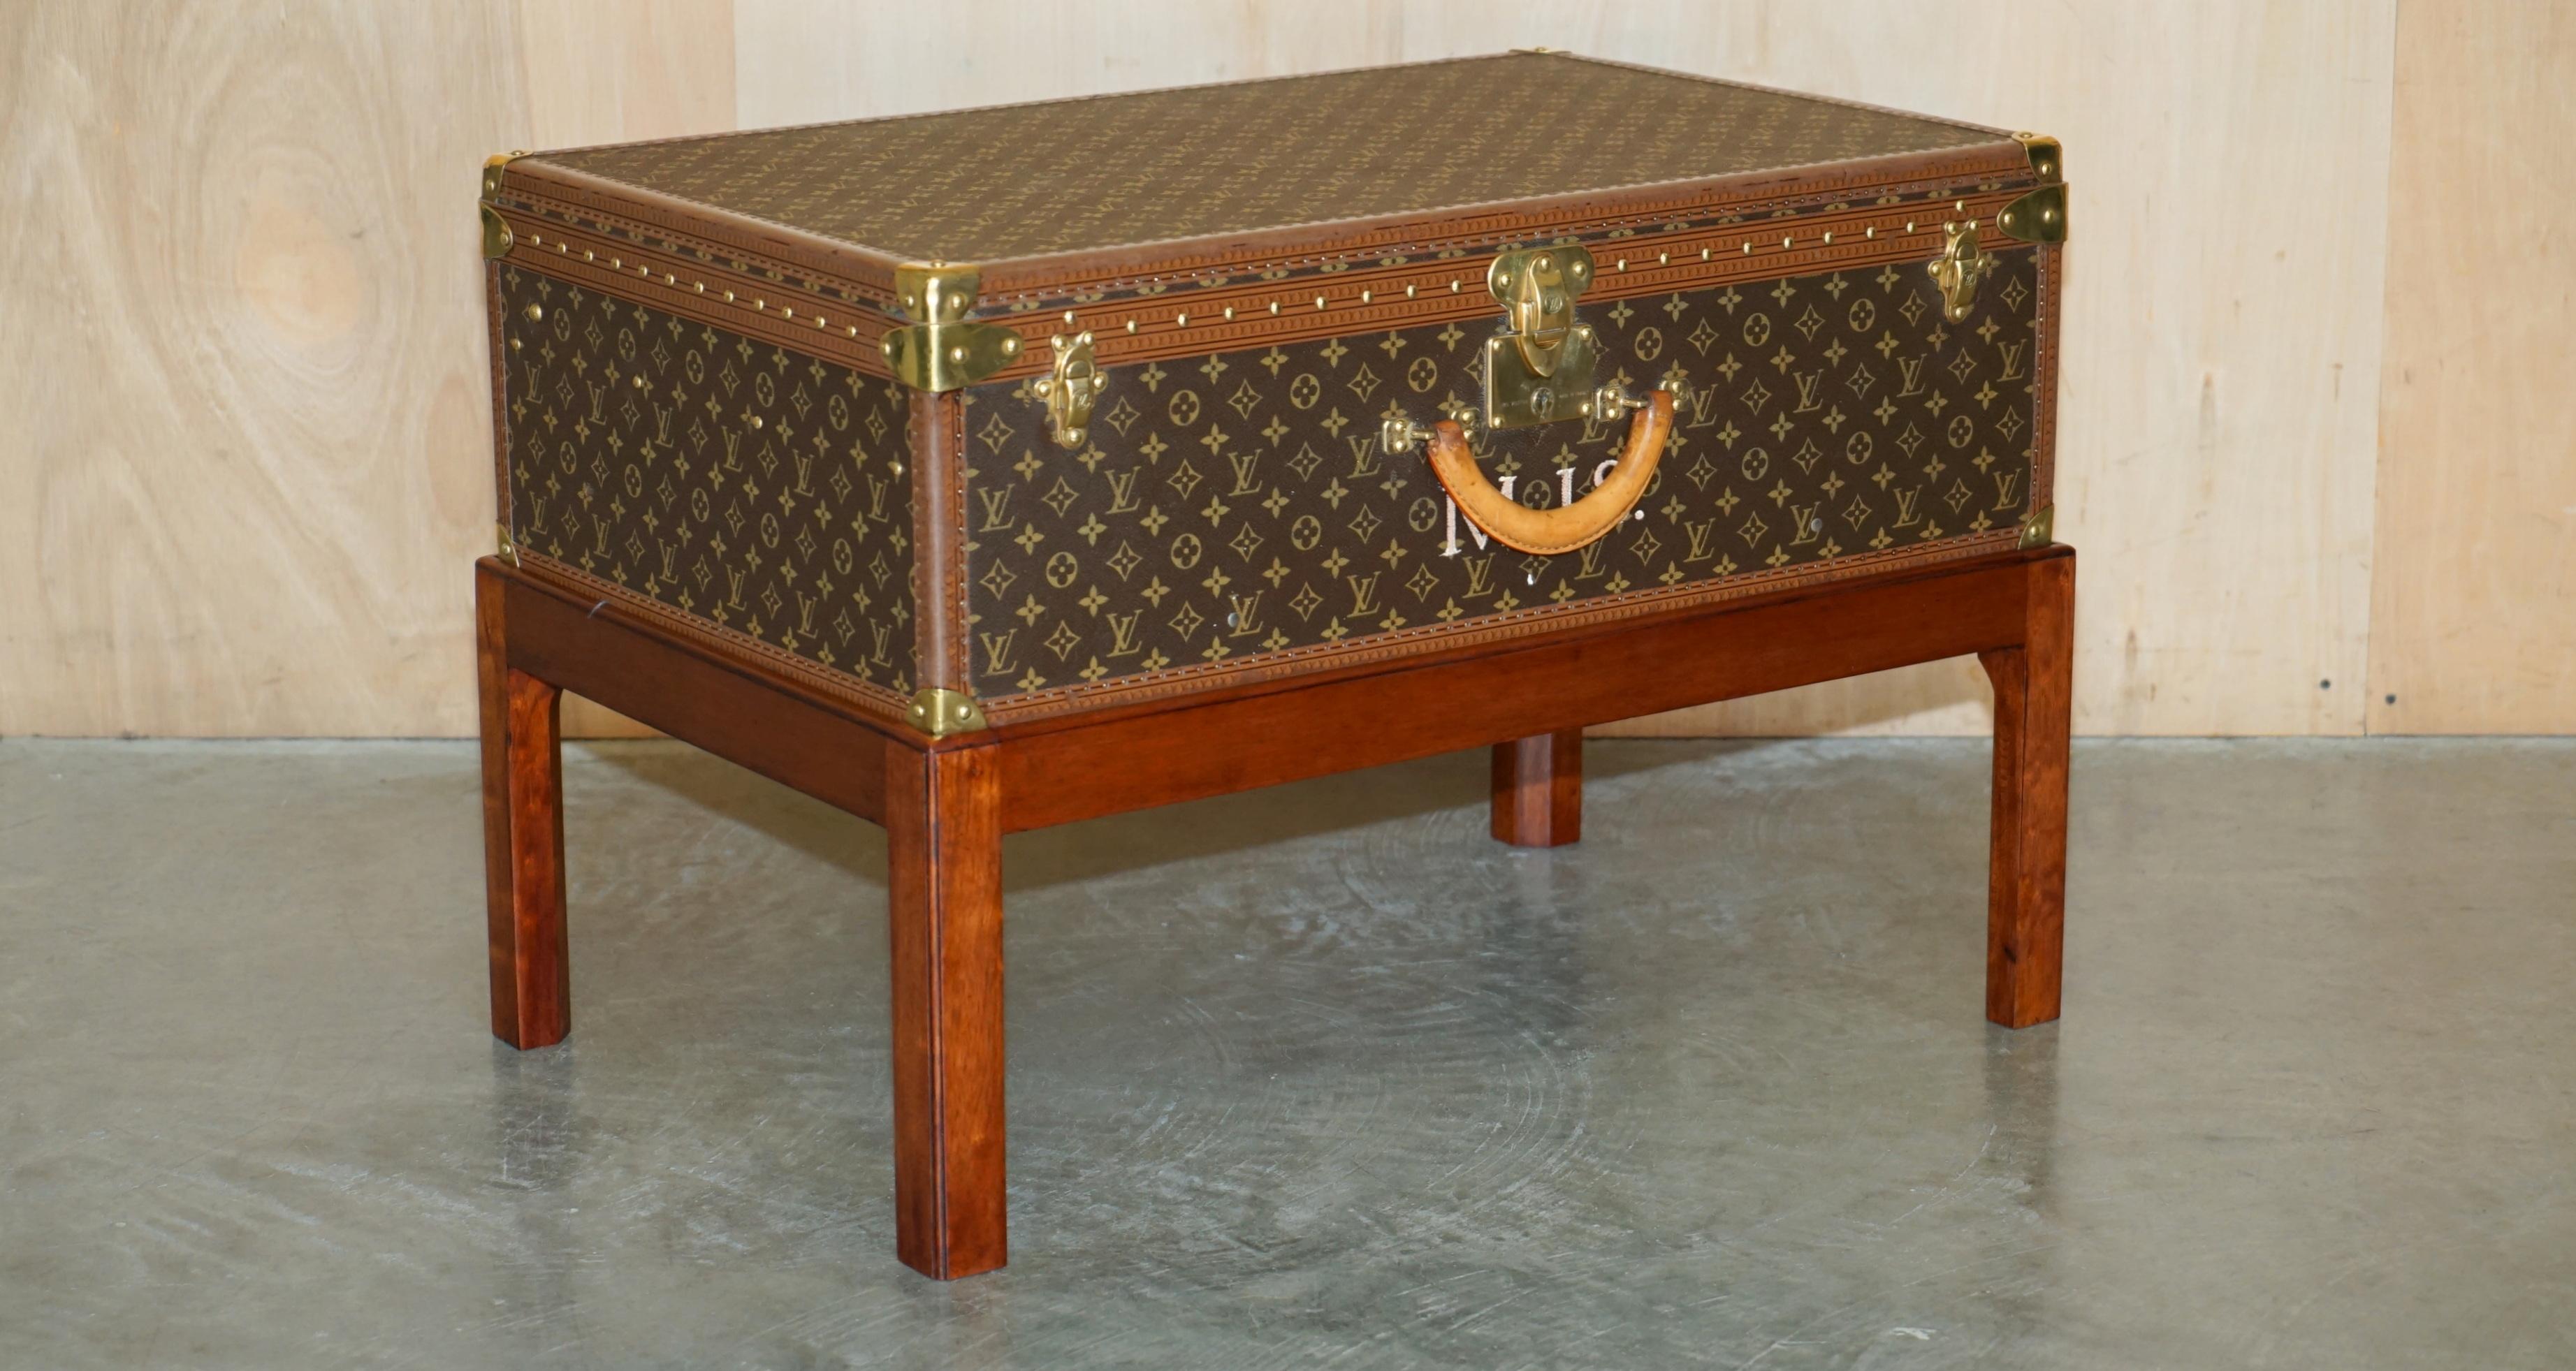 Royal House Antiques

Royal House Antiques is delighted to offer for sale this extremely important, fully restored vintage Louis Vuitton Paris suitcase trunk on custom made coffee table base 

Please note the delivery fee listed is just a guide, it